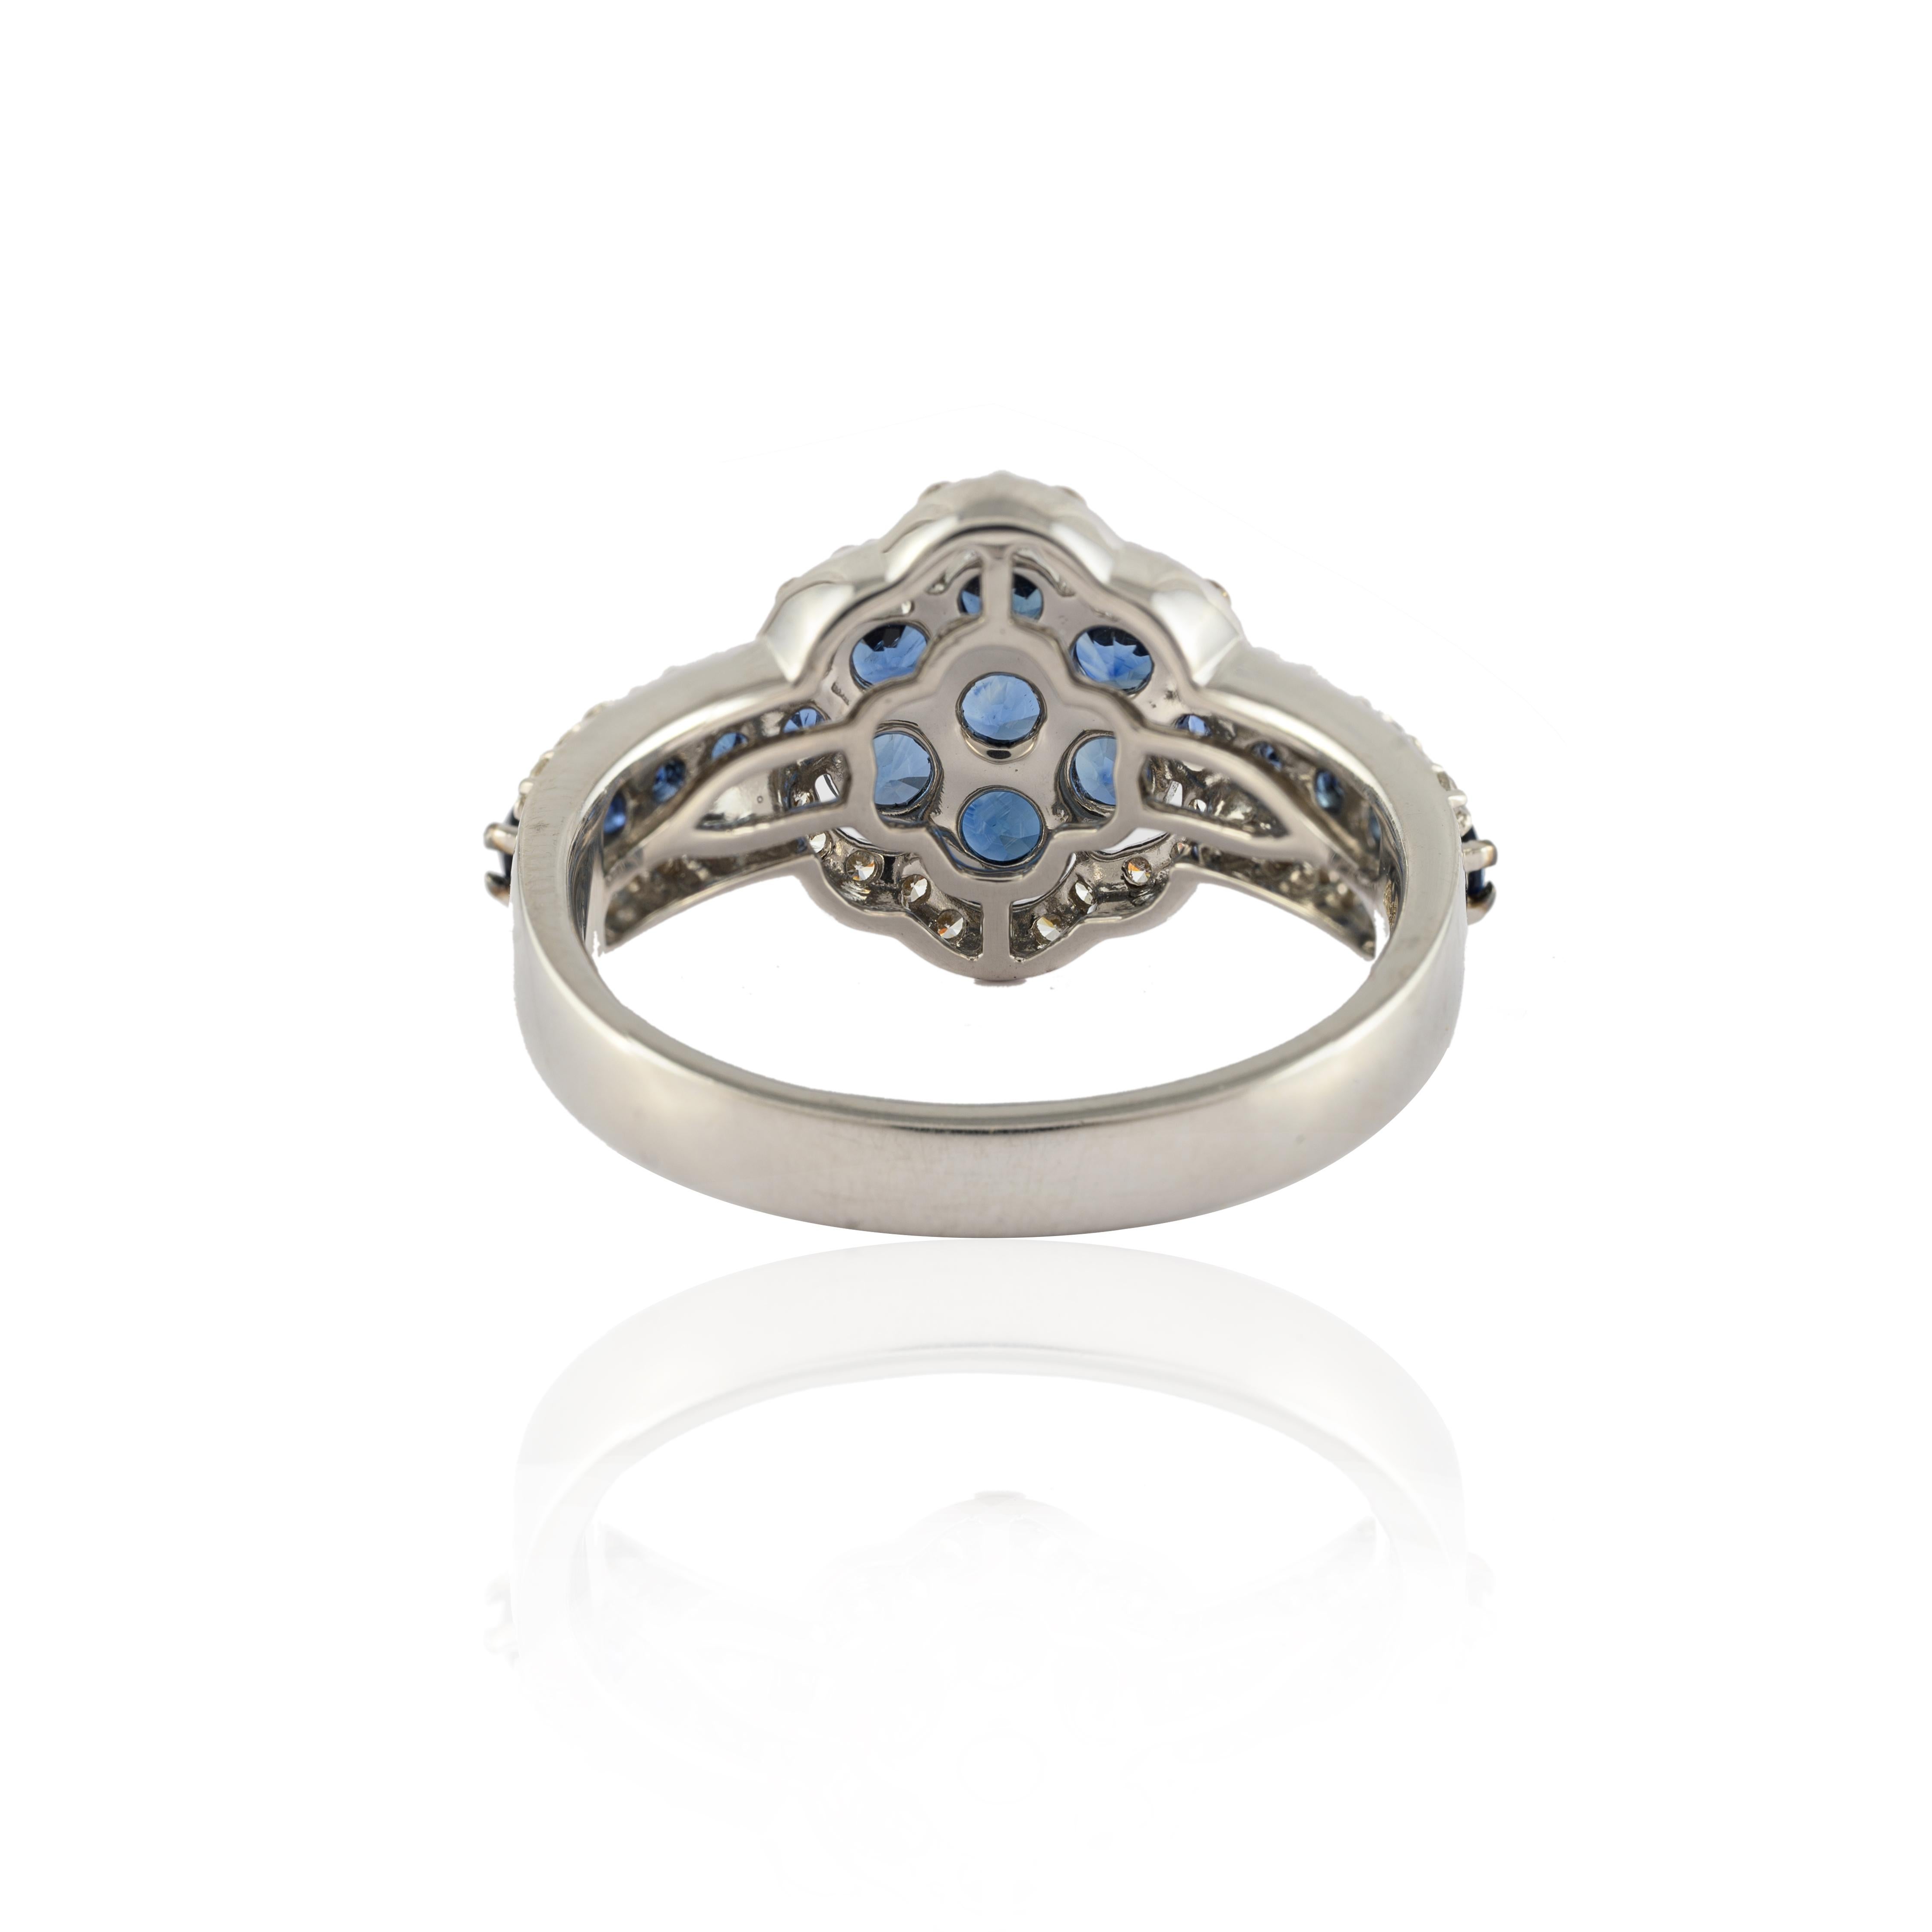 For Sale:  Unique Blue Sapphire Floral Ring with Diamonds in 14k Solid White Gold 4